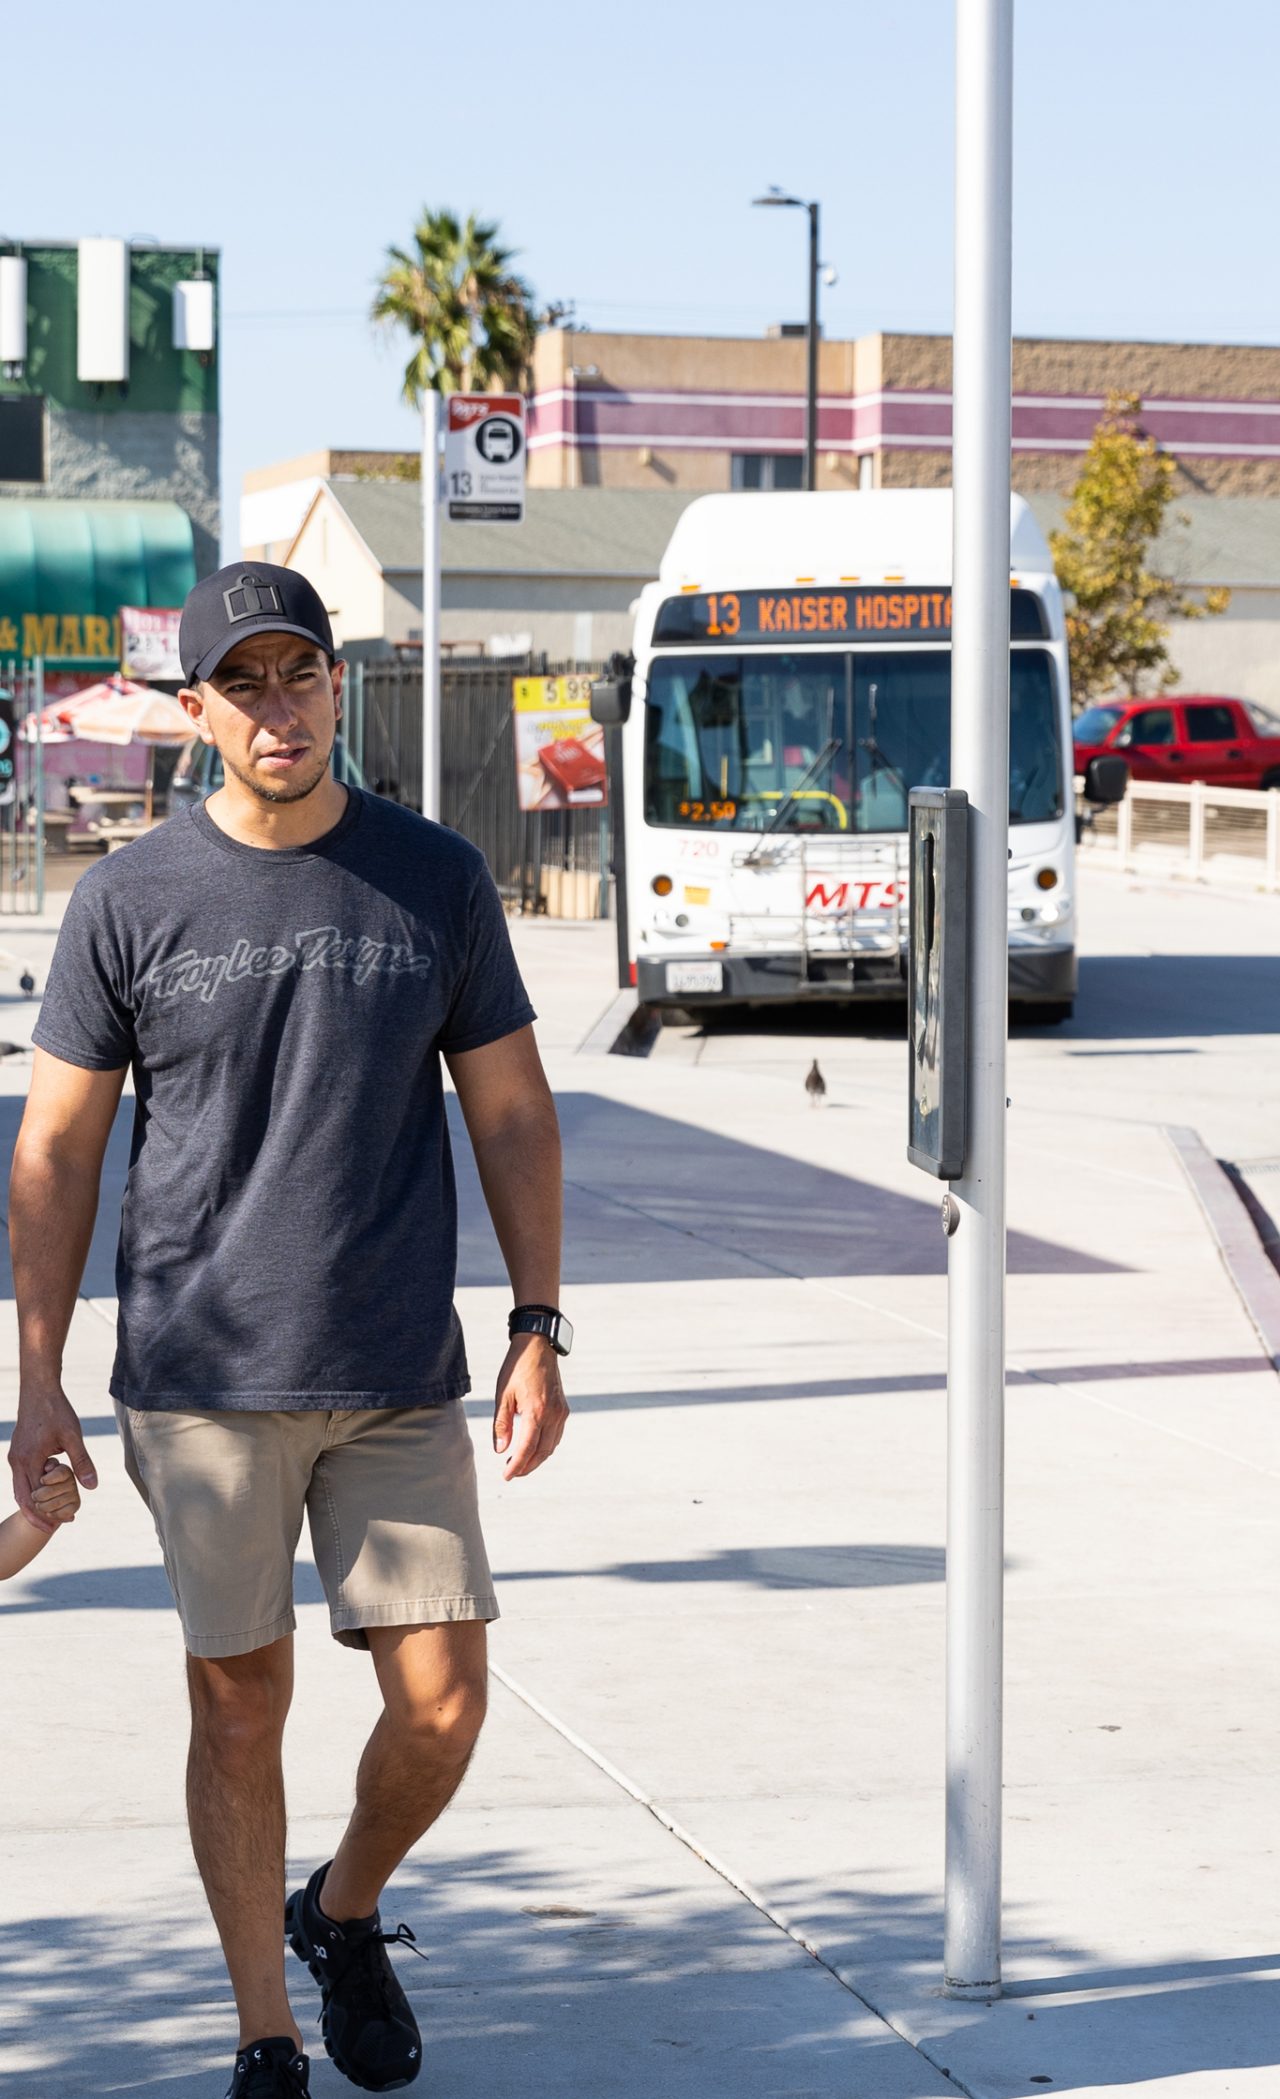 David Rodriguez takes his 2 year old son Oliver to the 24th Street Trolley and Transit Station in National City, California to look at the trolleys and buses pass by.